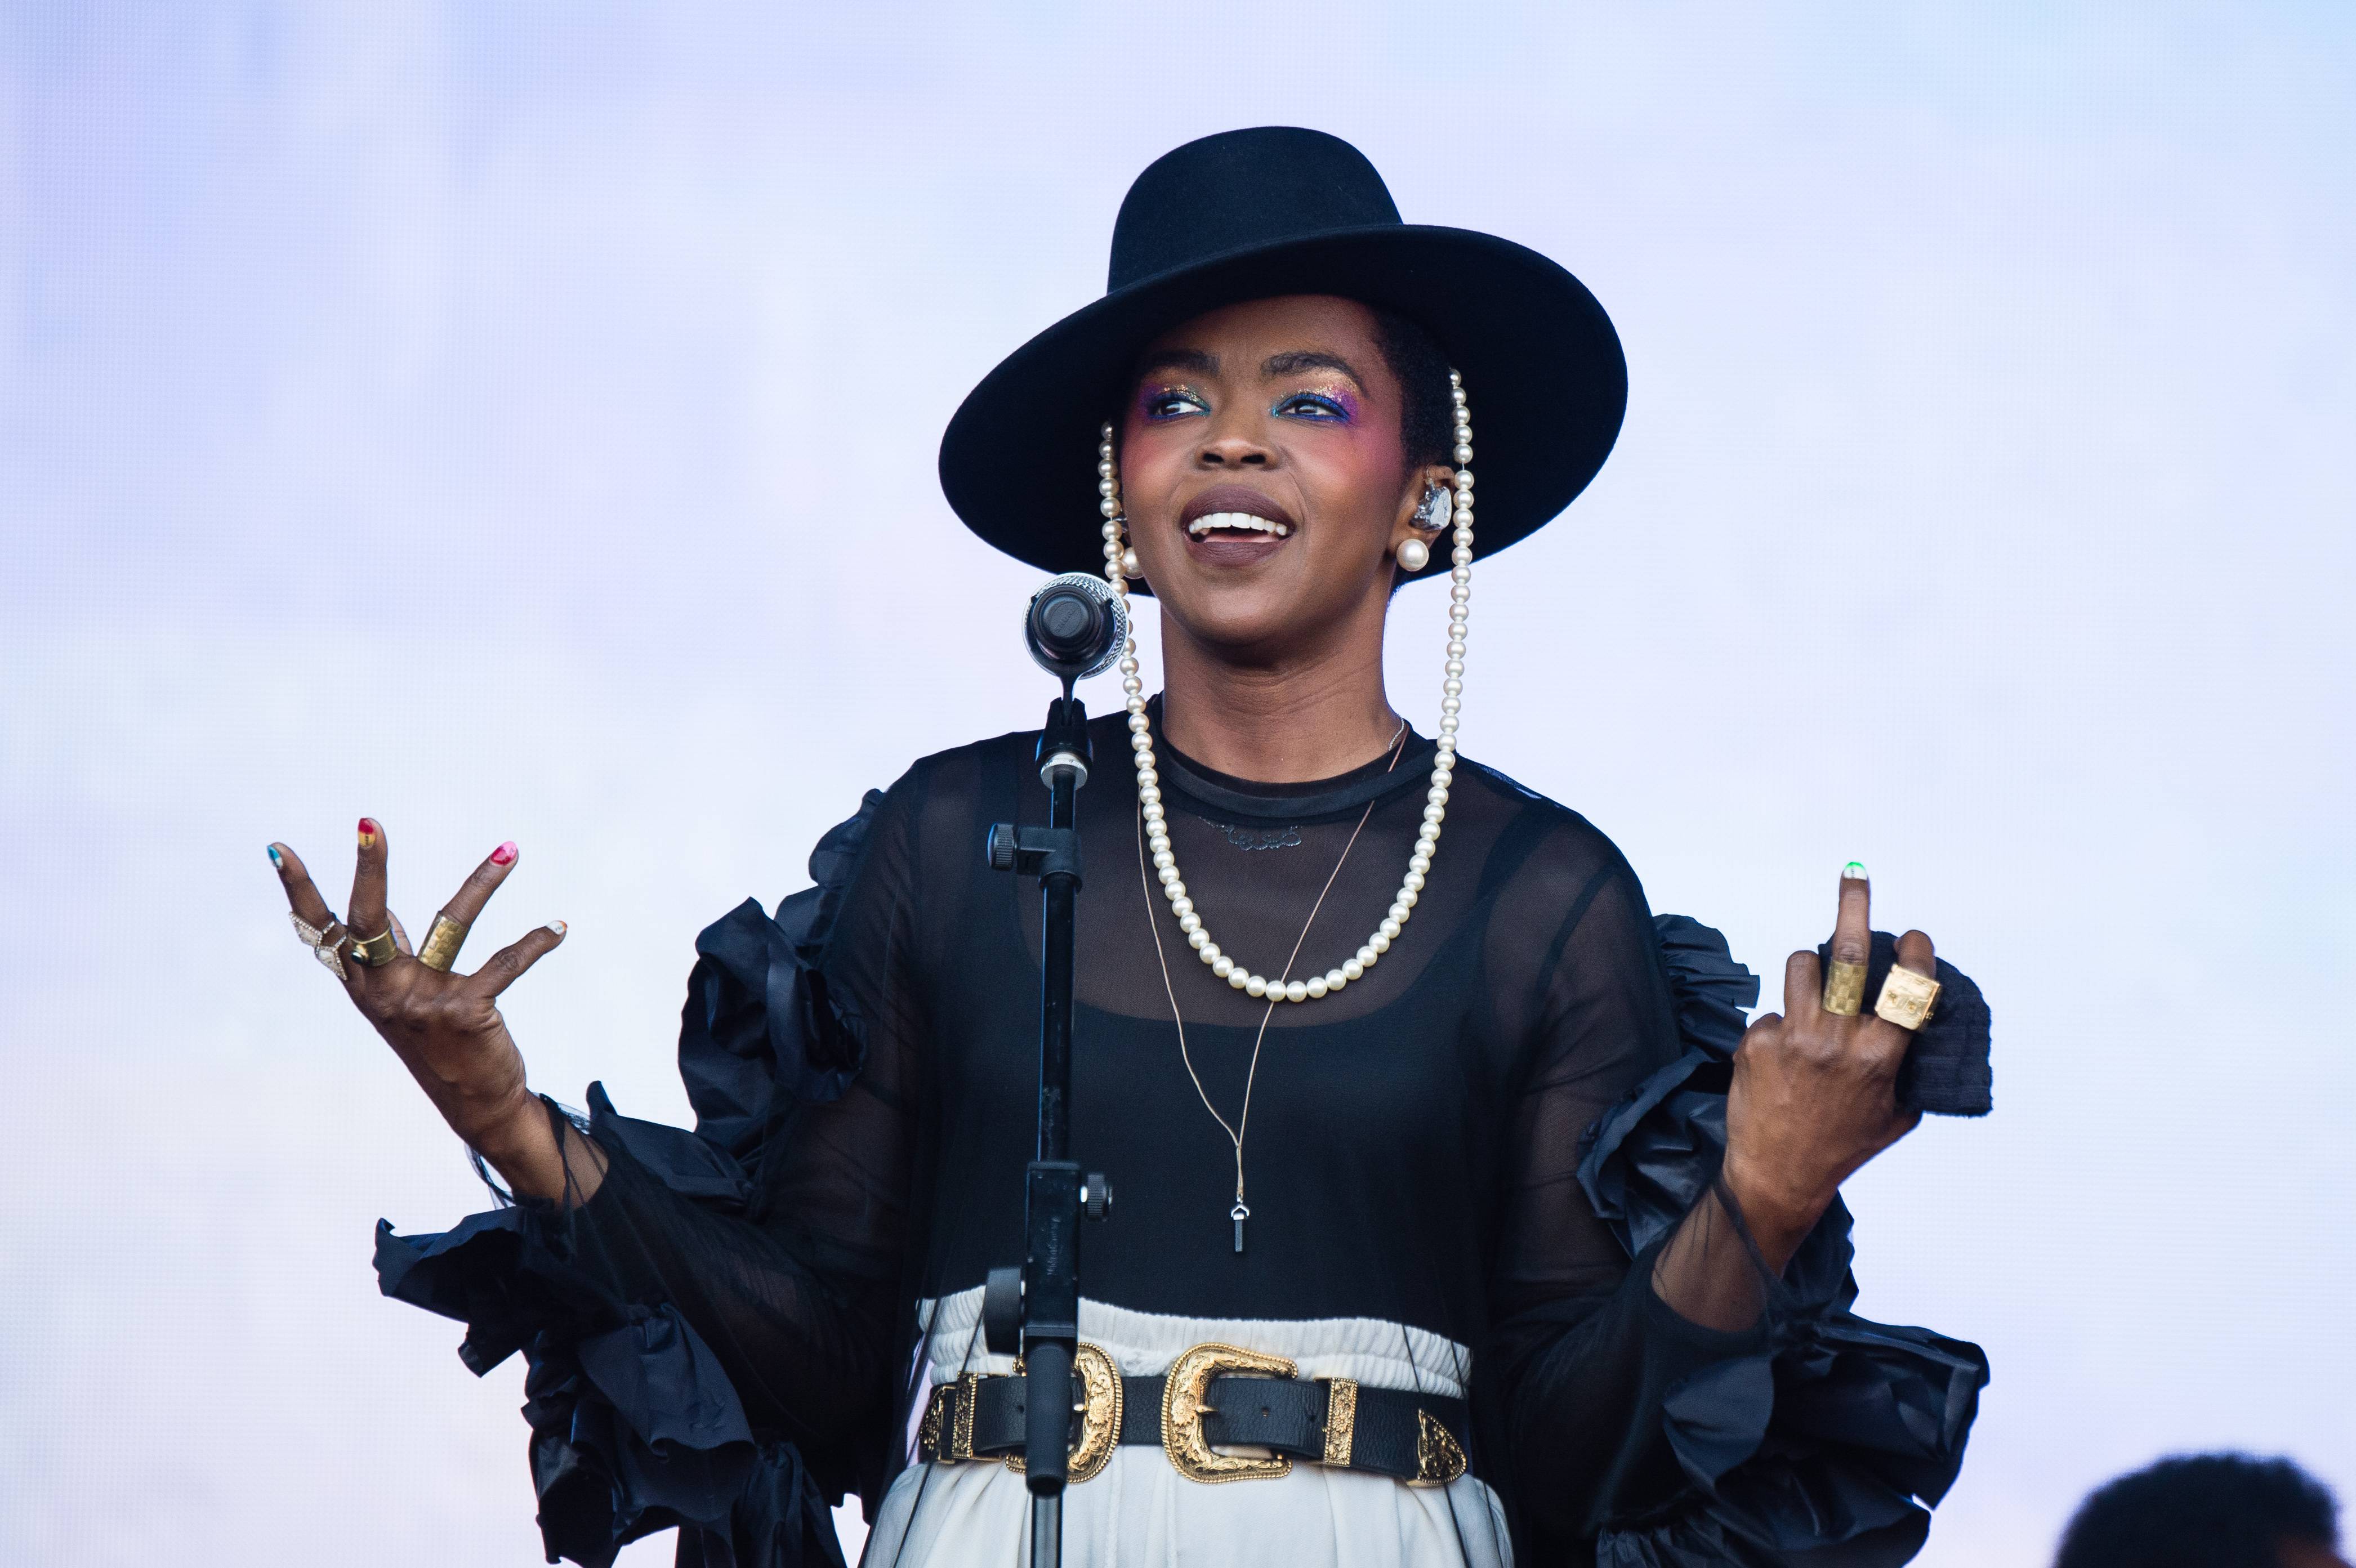 GLASTONBURY, ENGLAND - JUNE 28: Lauryn Hill performs on The Pyramid Stage during day three of Glastonbury Festival at Worthy Farm, Pilton on June 28, 2019 in Glastonbury, England. (Photo by Harry Durrant/Getty Images)